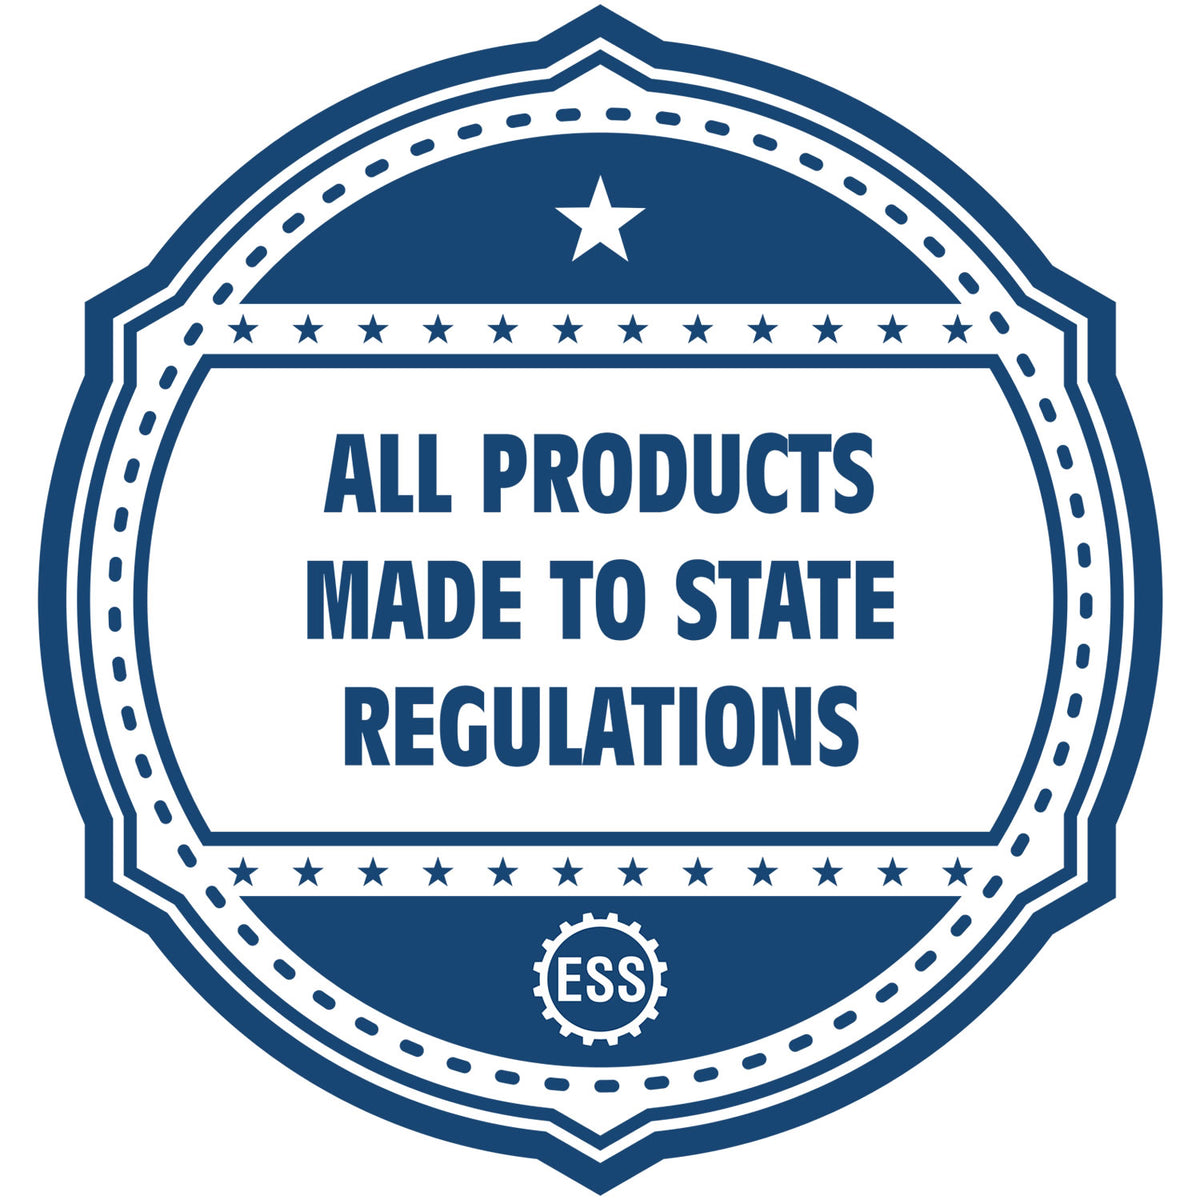 An icon or badge element for the State of Alaska Soft Land Surveyor Embossing Seal showing that this product is made in compliance with state regulations.